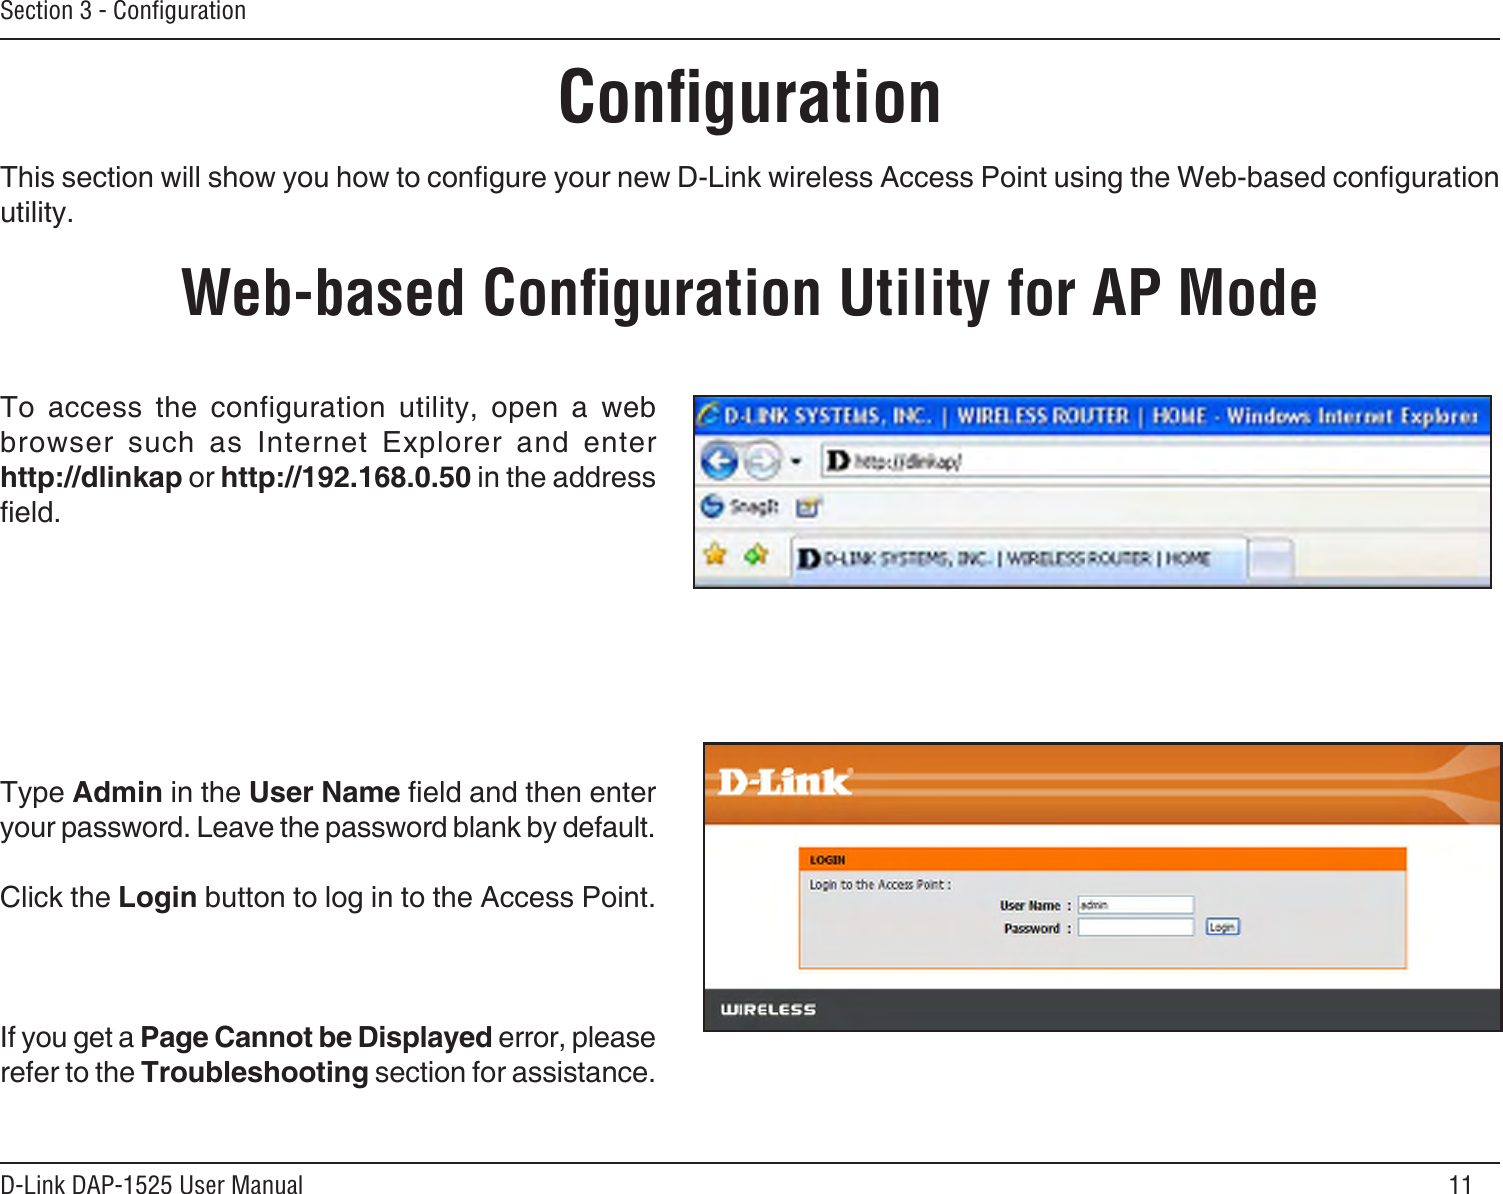 11D-Link DAP-1525 User ManualSection 3 - ConﬁgurationConﬁgurationThis section will show you how to congure your new D-Link wireless Access Point using the Web-based conguration utility.Web-based Conﬁguration Utility for AP ModeTo  access  the  configuration  utility,  open  a  web browser  such  as  Internet  Explorer  and  enter  http://dlinkap or http://192.168.0.50 in the address eld.Type Admin in the User Name eld and then enter your password. Leave the password blank by default. Click the Login button to log in to the Access Point.If you get a Page Cannot be Displayed error, please refer to the Troubleshooting section for assistance.